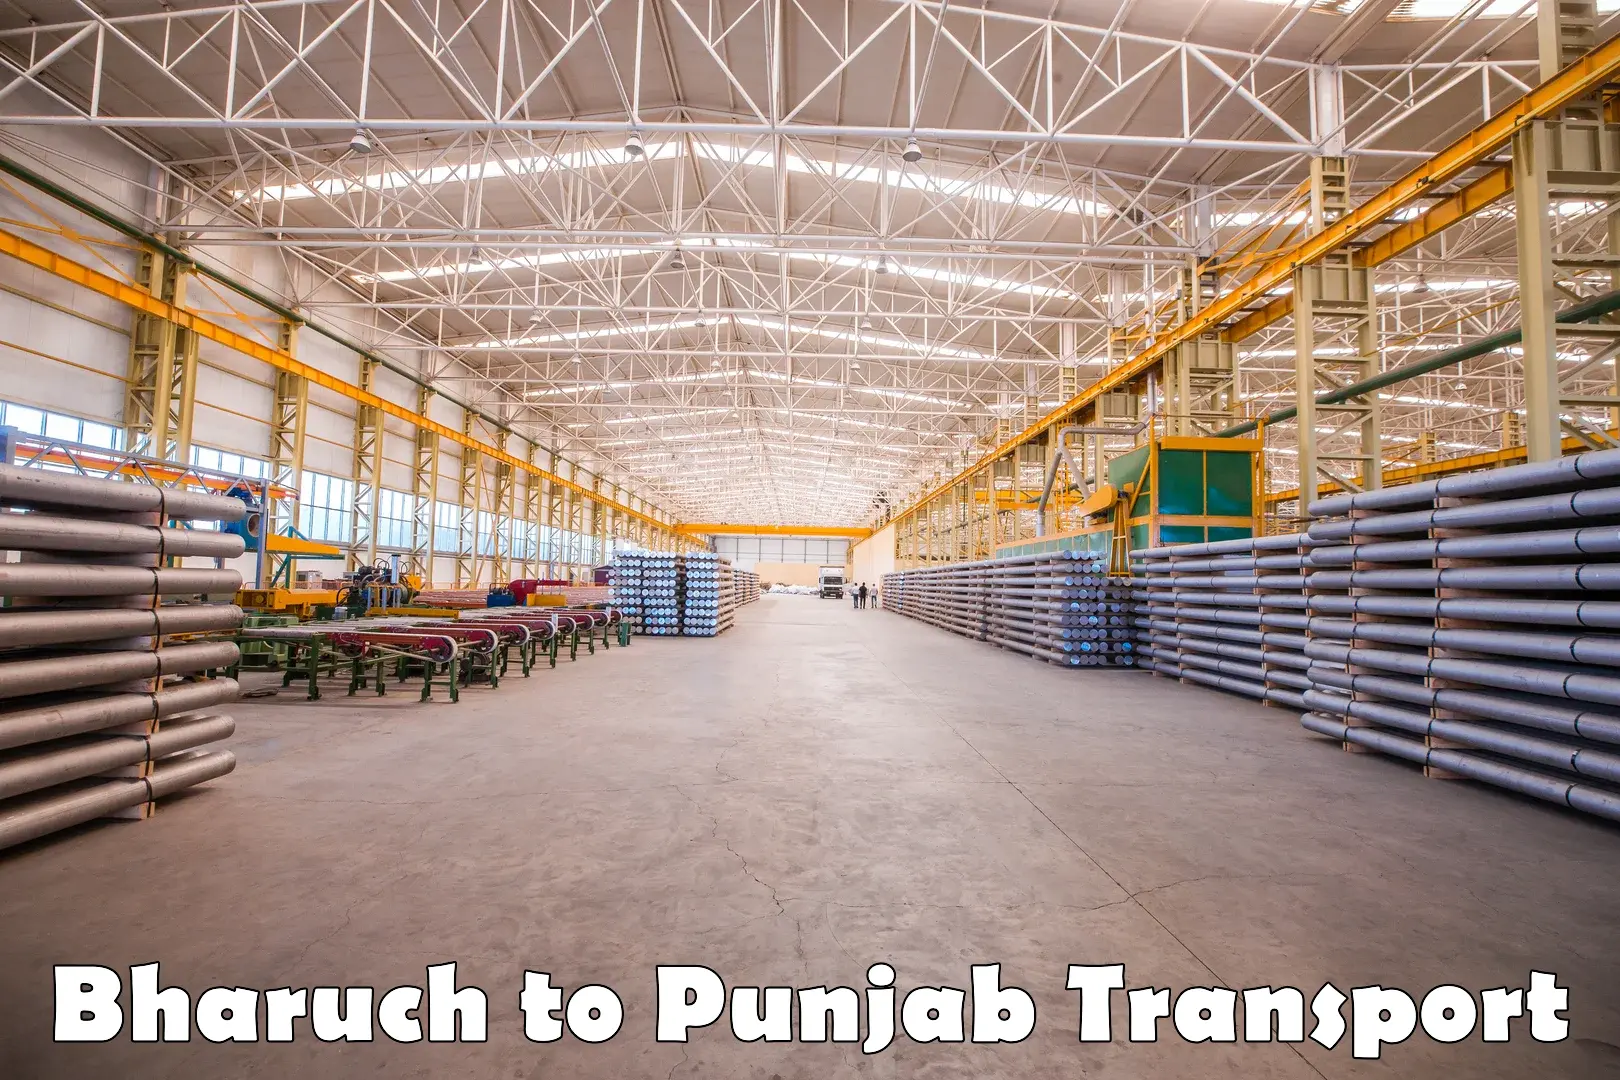 Commercial transport service Bharuch to Punjab